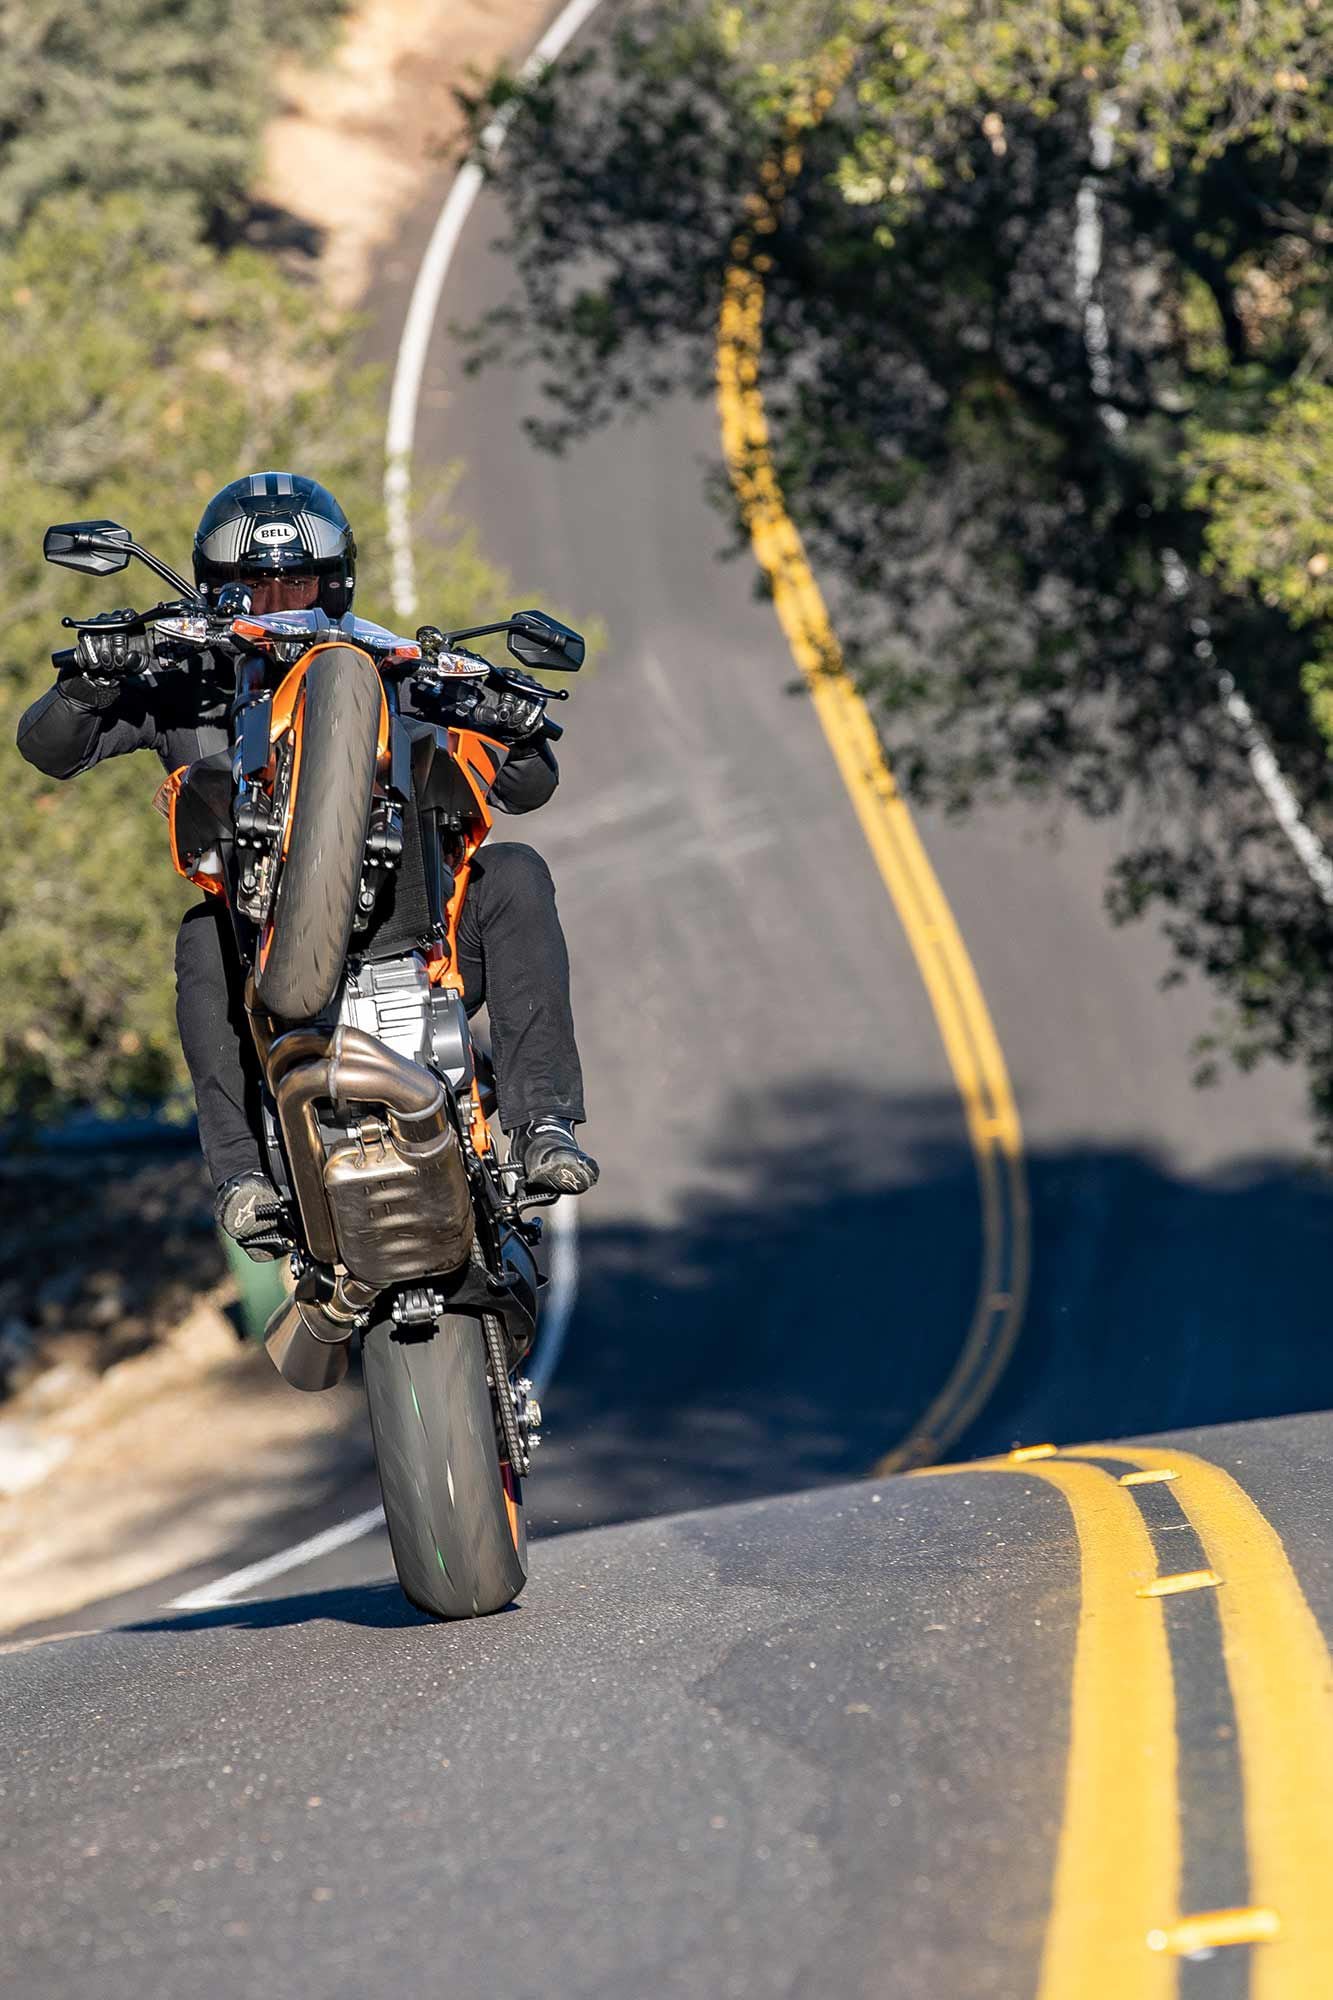 A year of mixed emotions on the KTM 1290 Super Duke R Evo